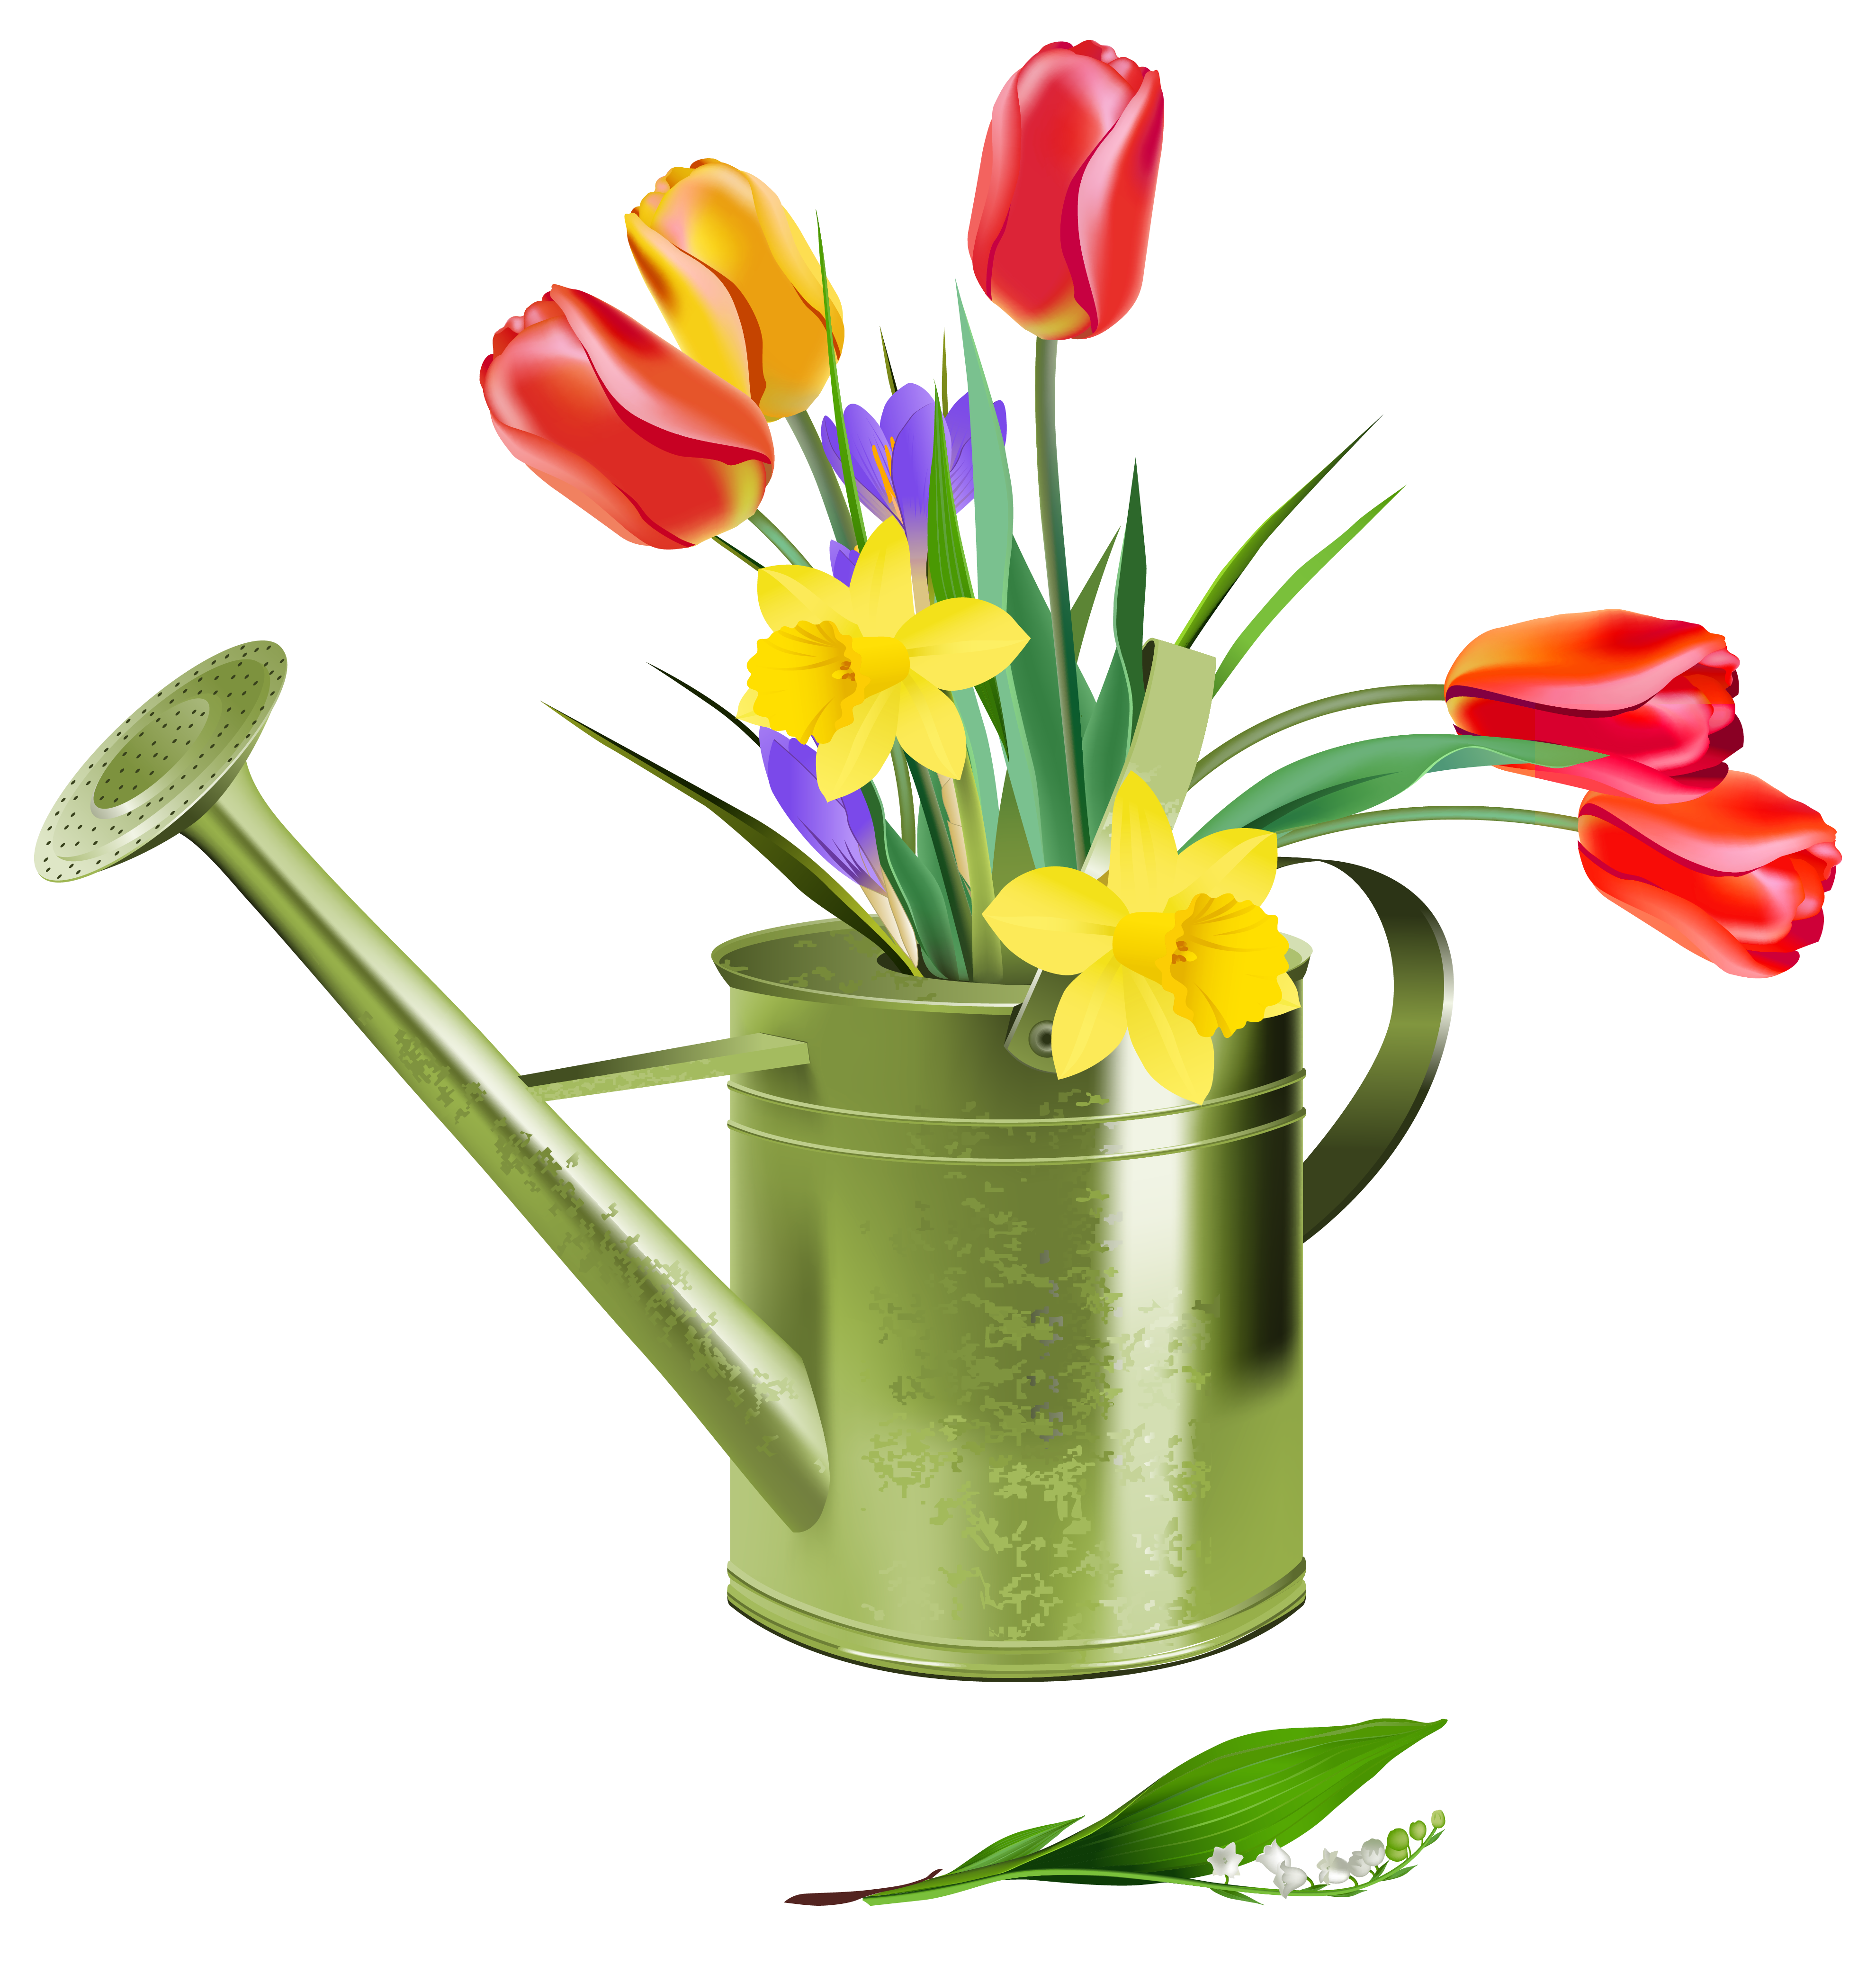 Vase clipart animal flower. Green watering can with